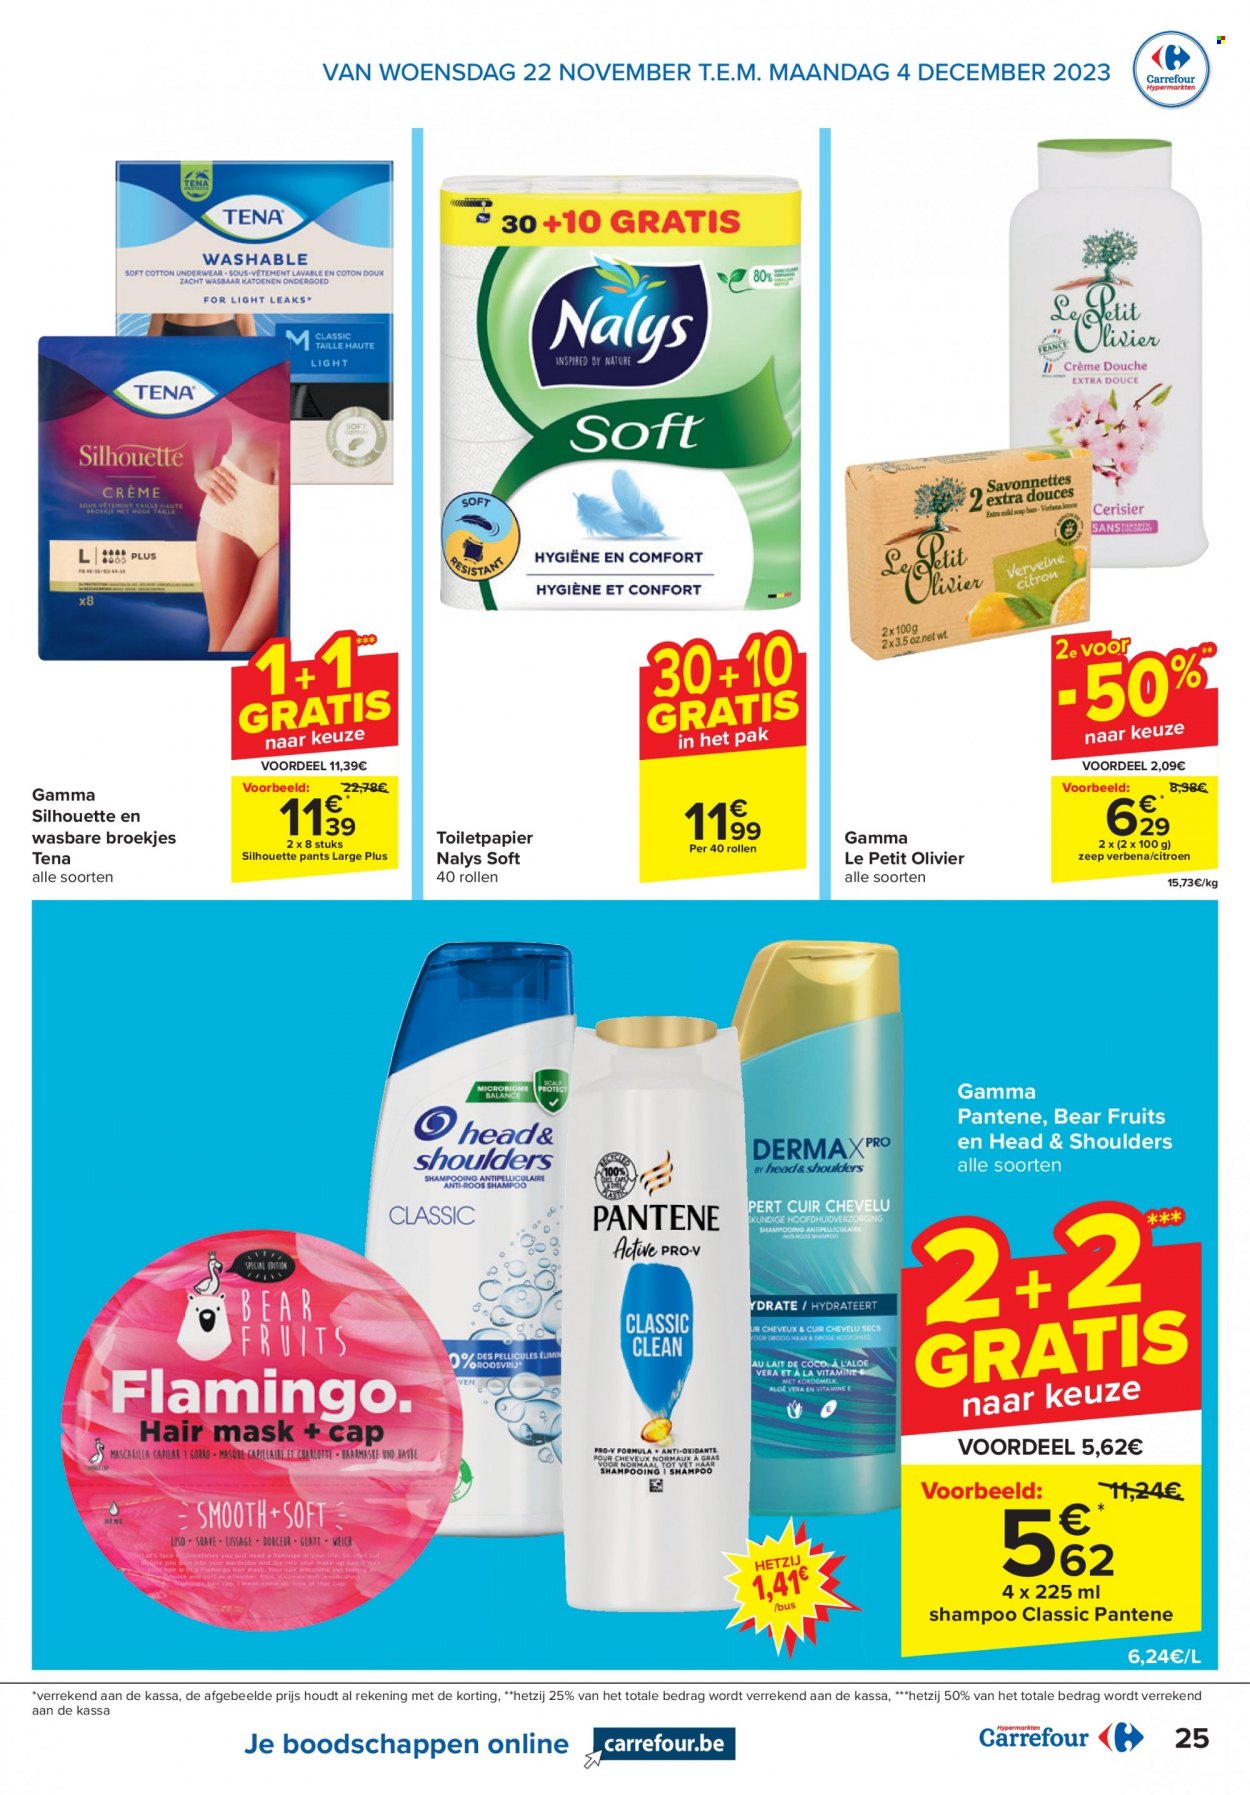 Catalogue Carrefour hypermarkt - 22.11.2023 - 4.12.2023. Page 25.